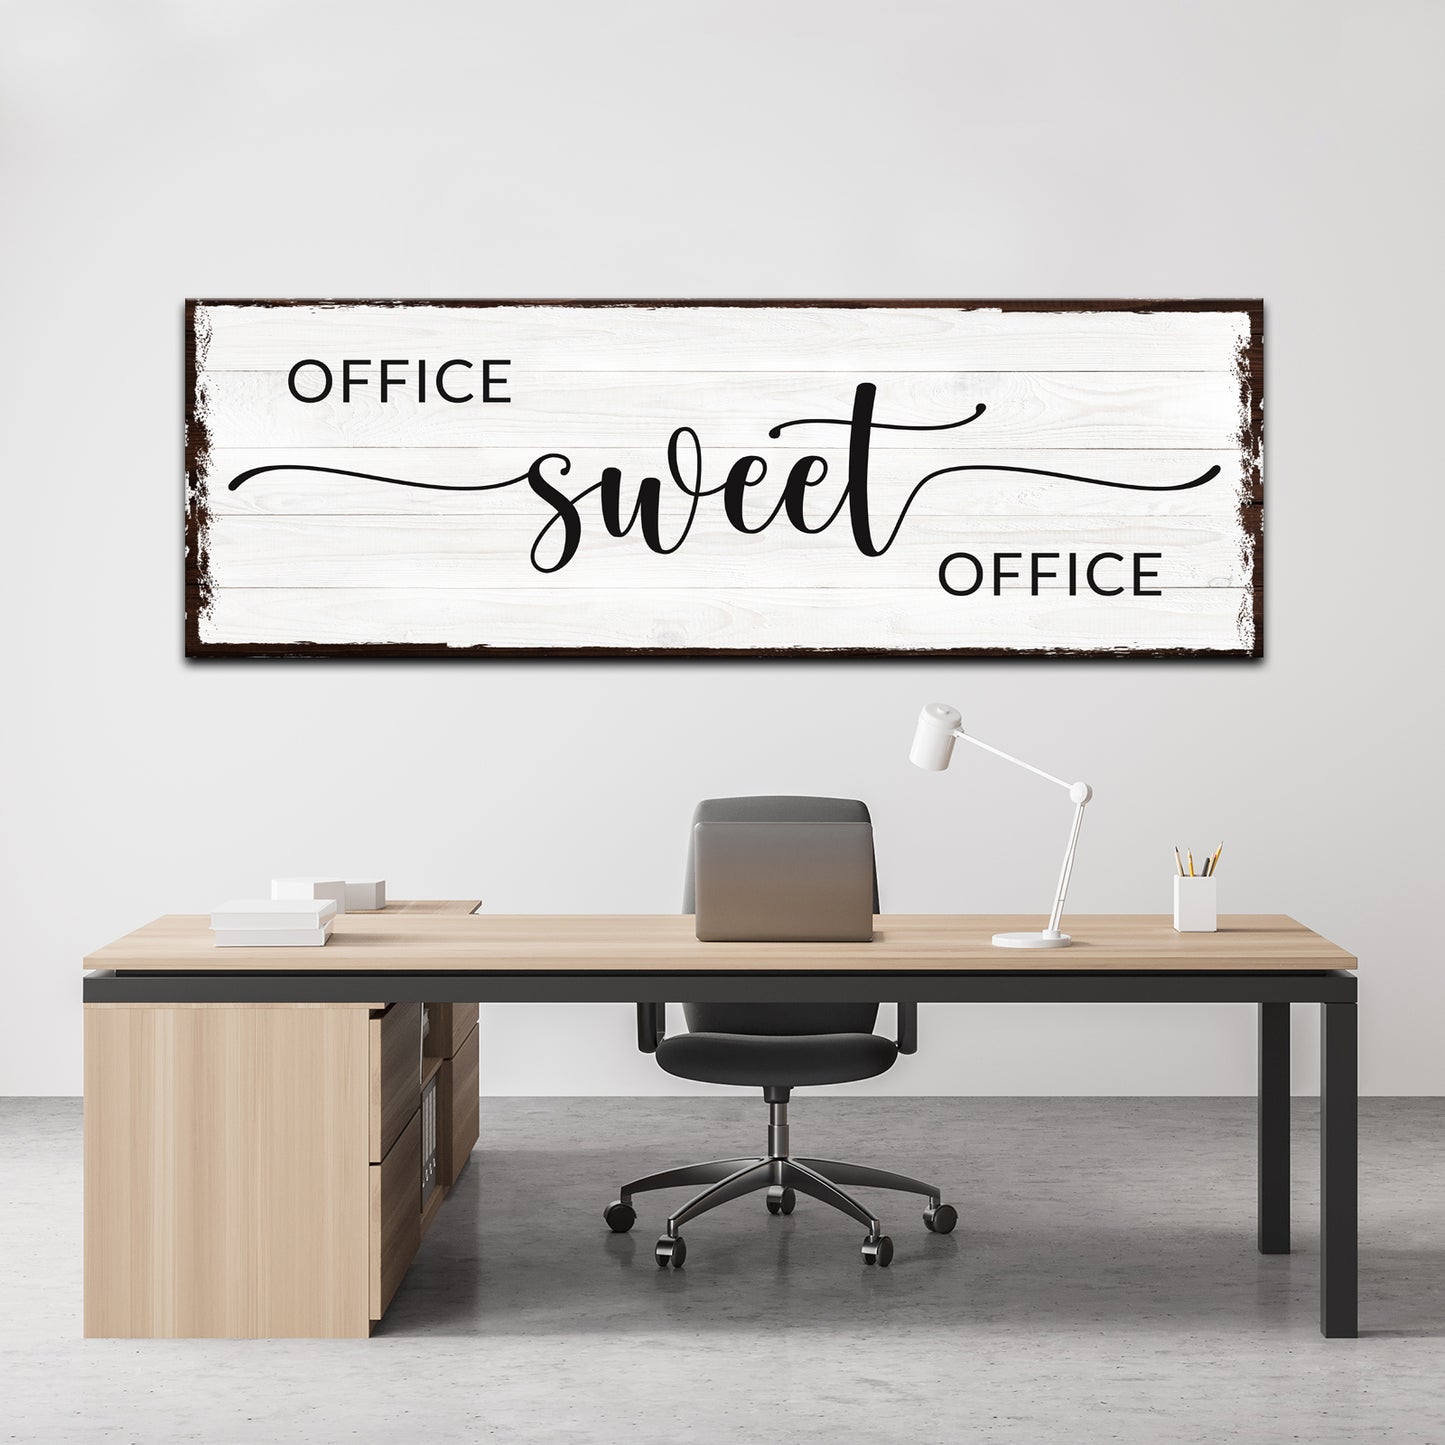 Office Sweet Office Sign - Image by Tailored Canvases